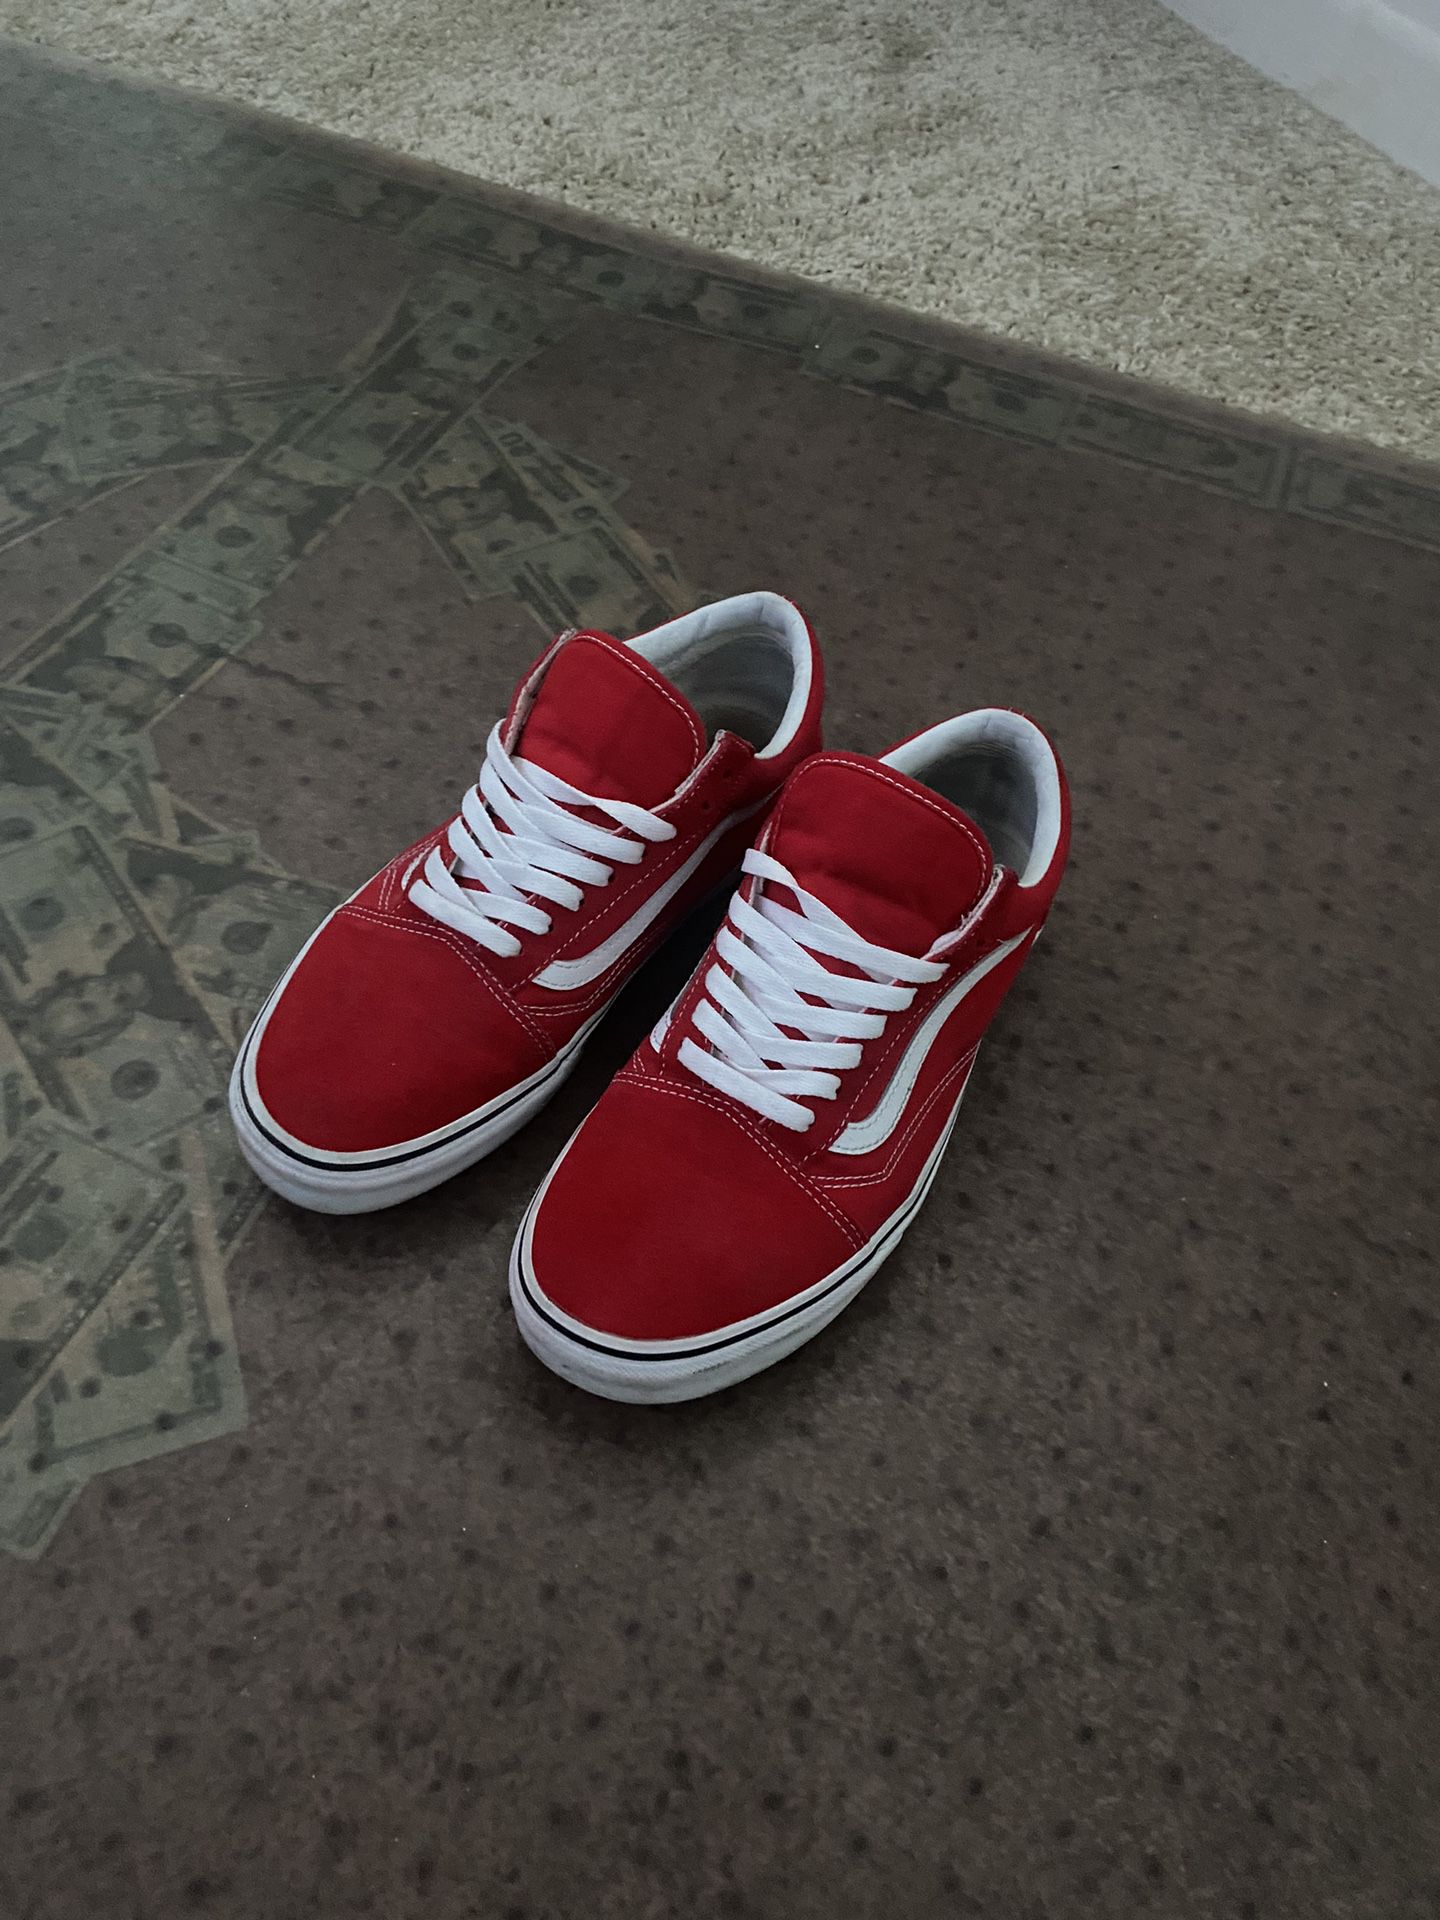 OFFERS!! (Red & White Vans)